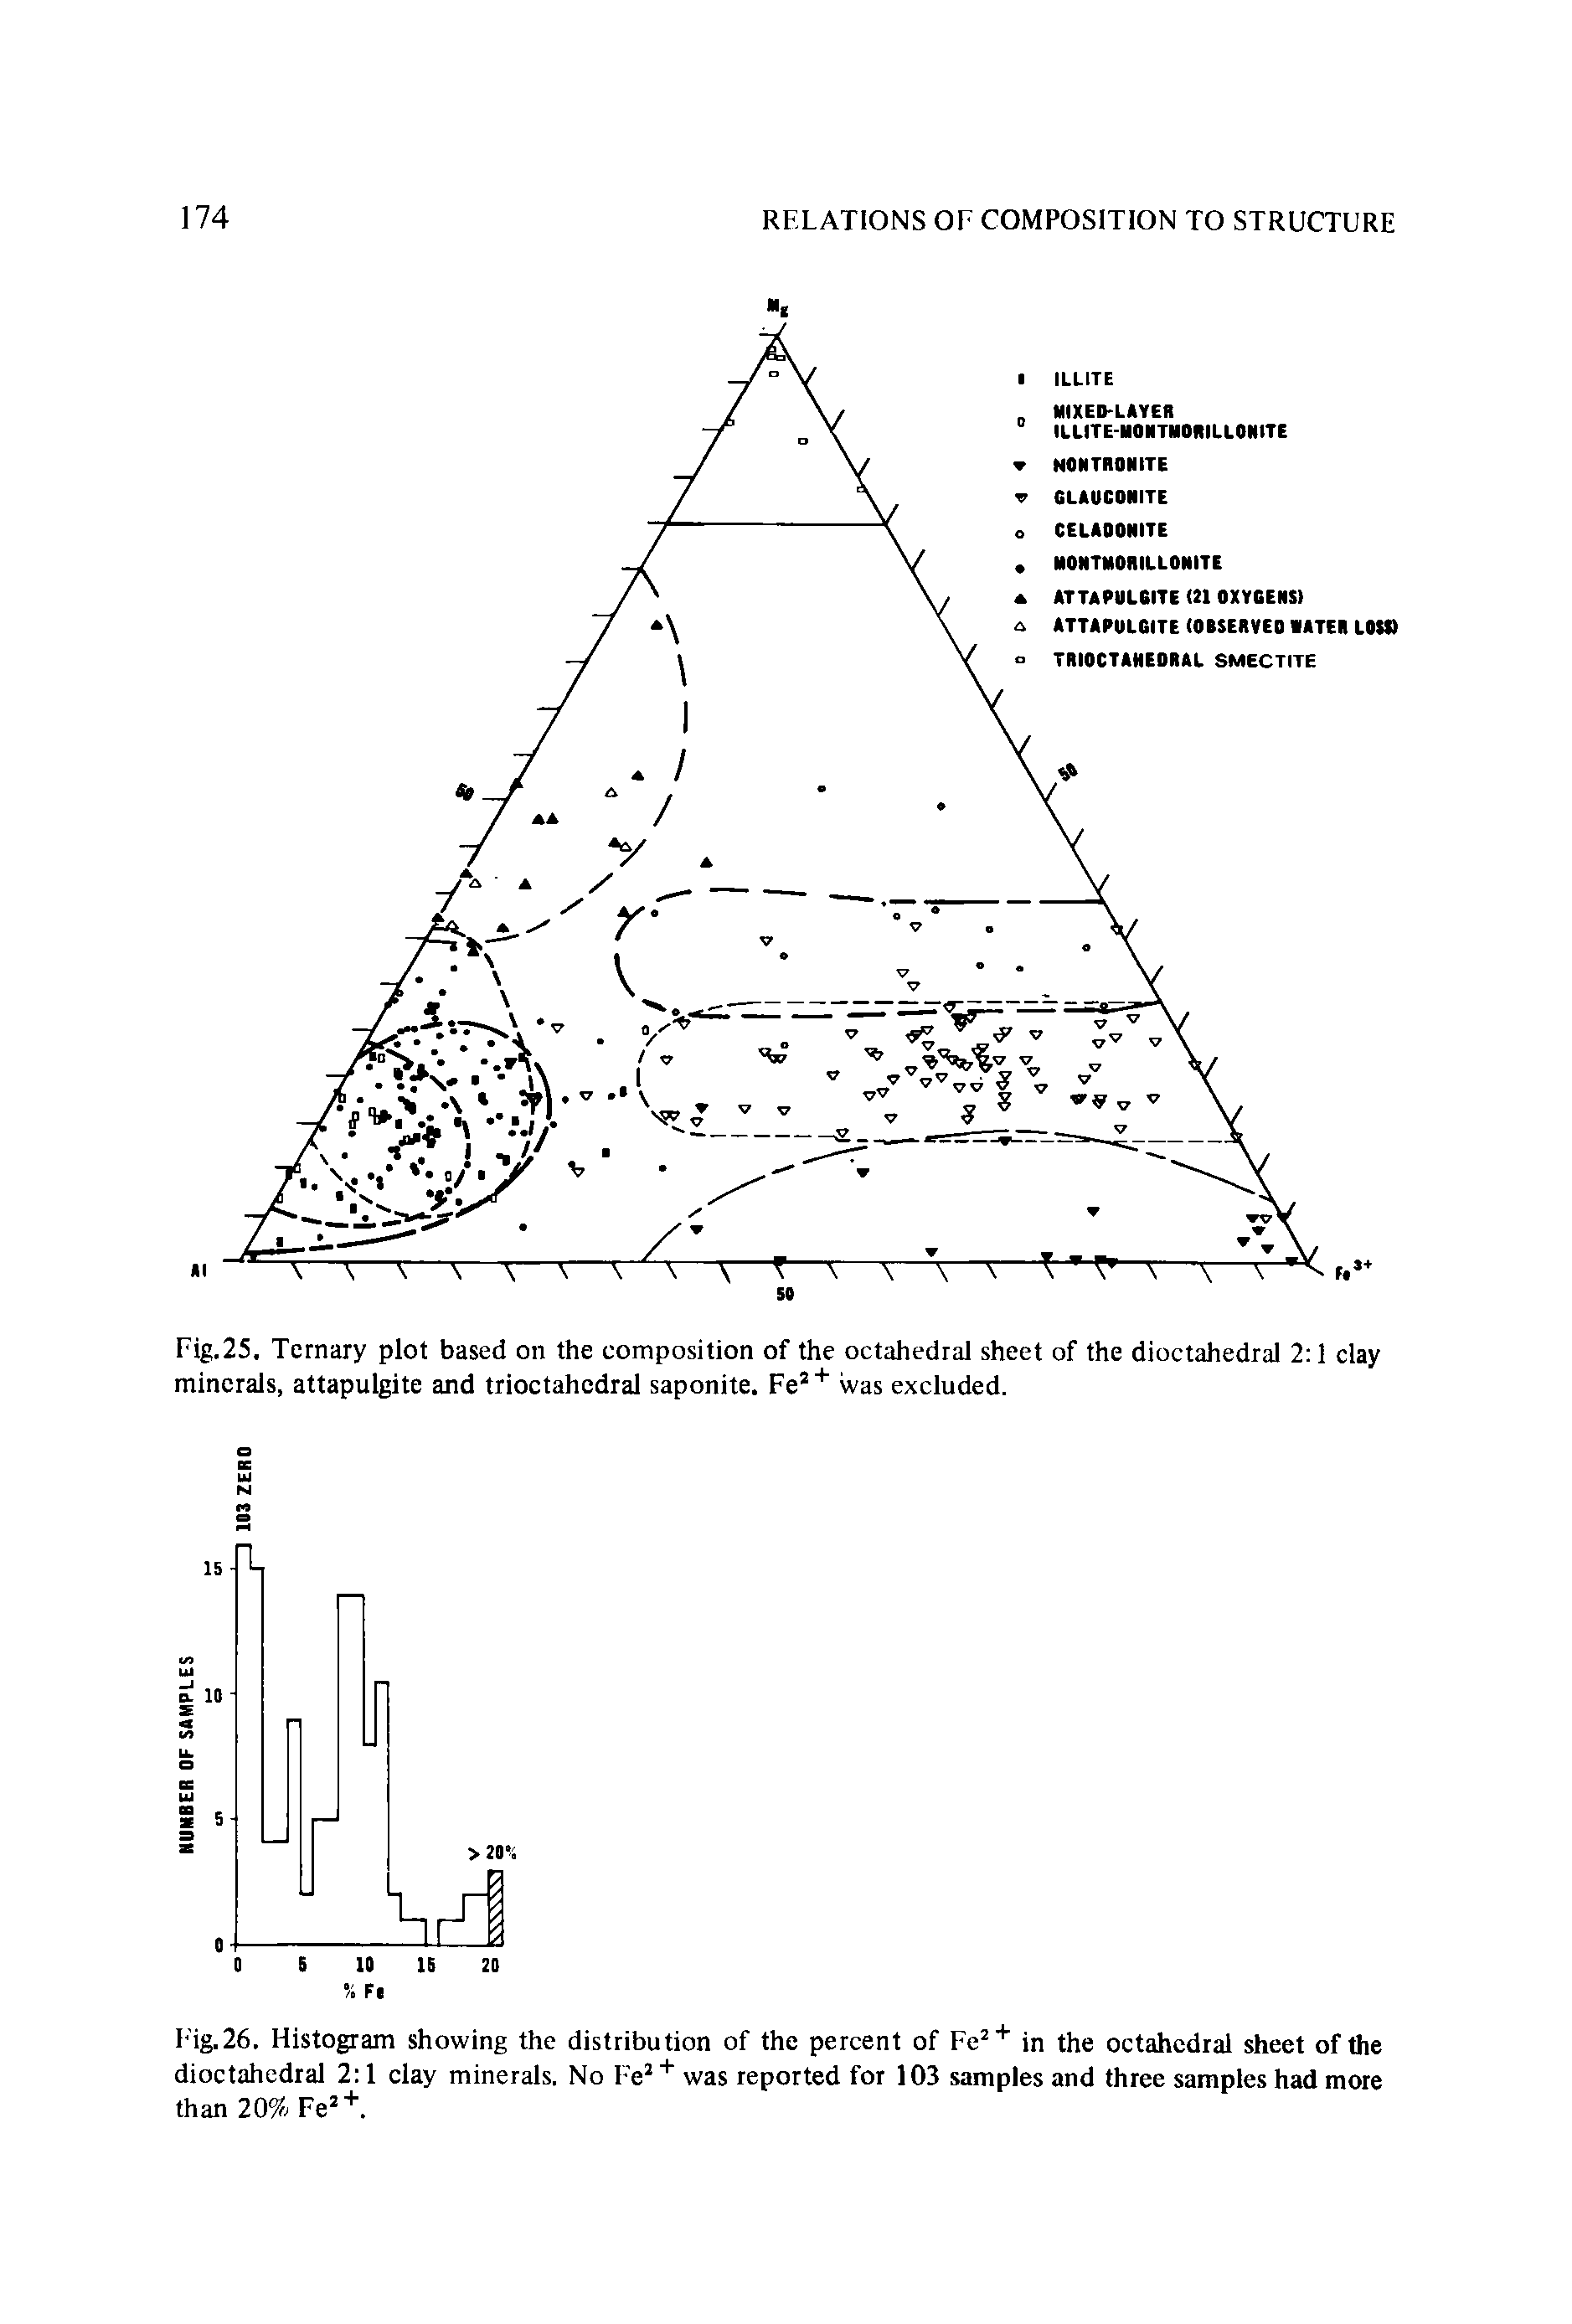 Fig.25. Ternary plot based on the composition of the octahedral sheet of the dioctahedral 2 1 clay minerals, attapulgite and trioctahcdral saponite. Fe2 + was excluded.